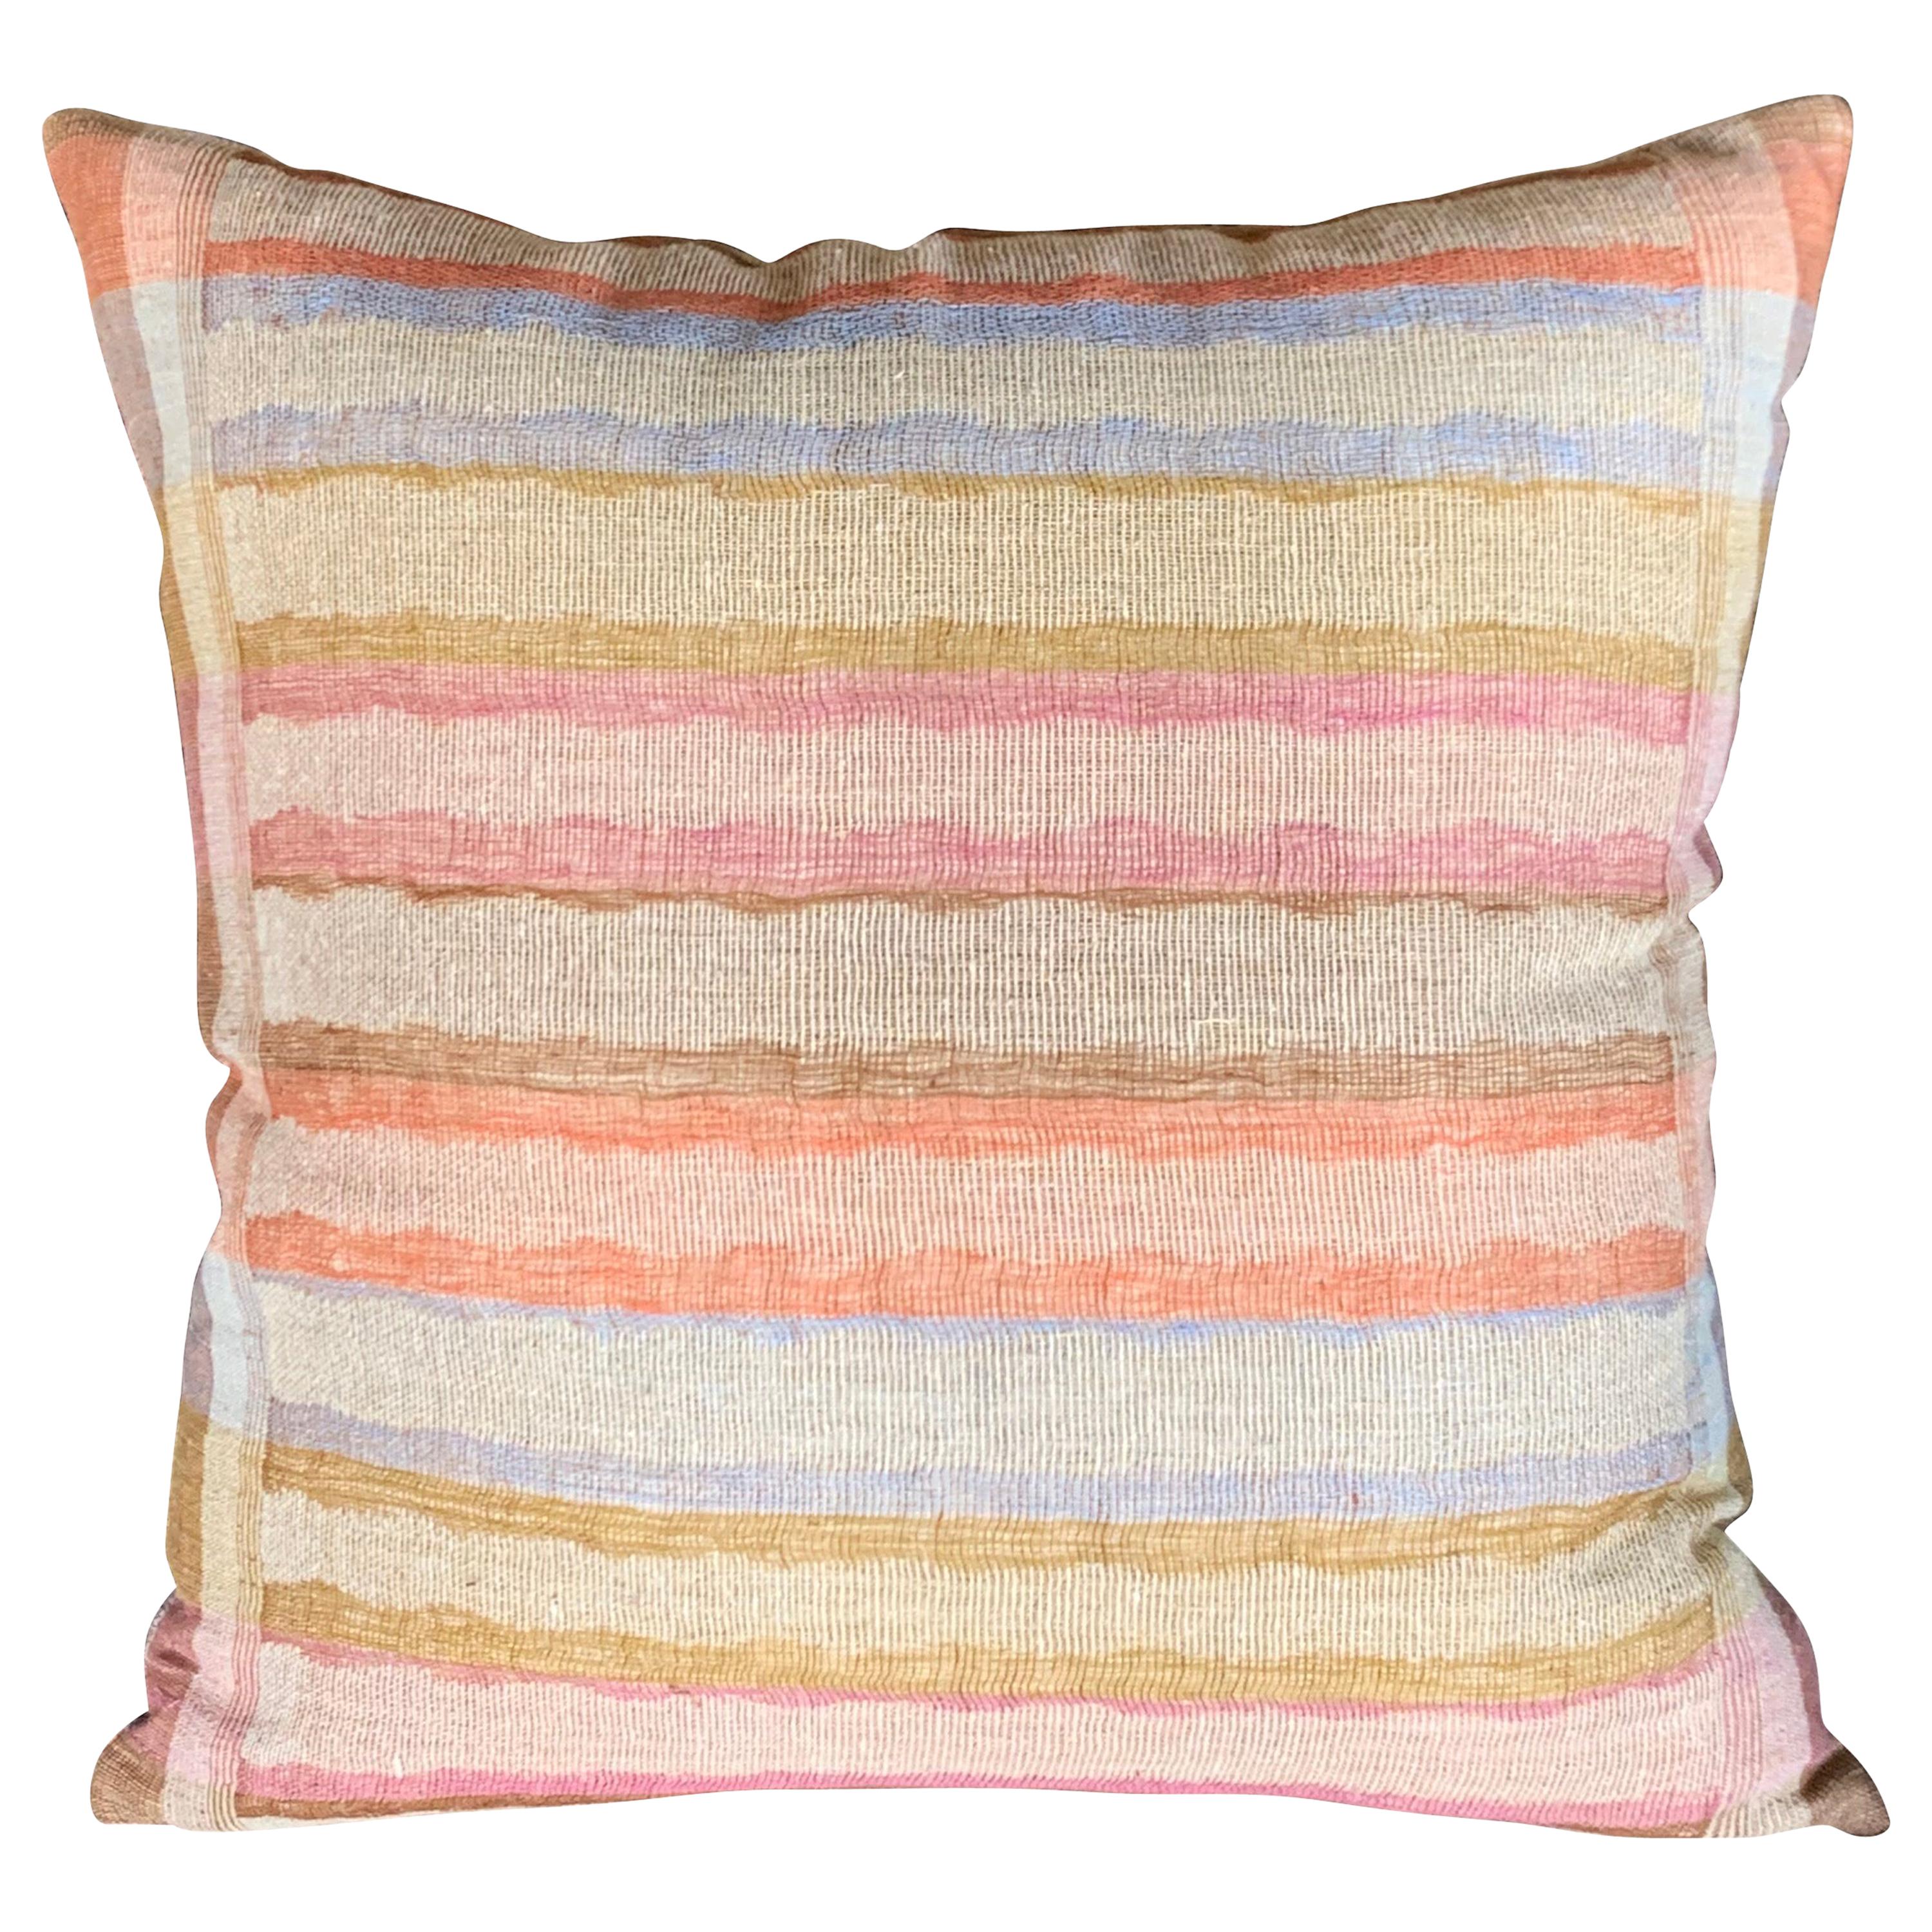 Pale Coral, Pale Blue, Yellow Handspun Linen Pillow, Indonesia, Contemporary